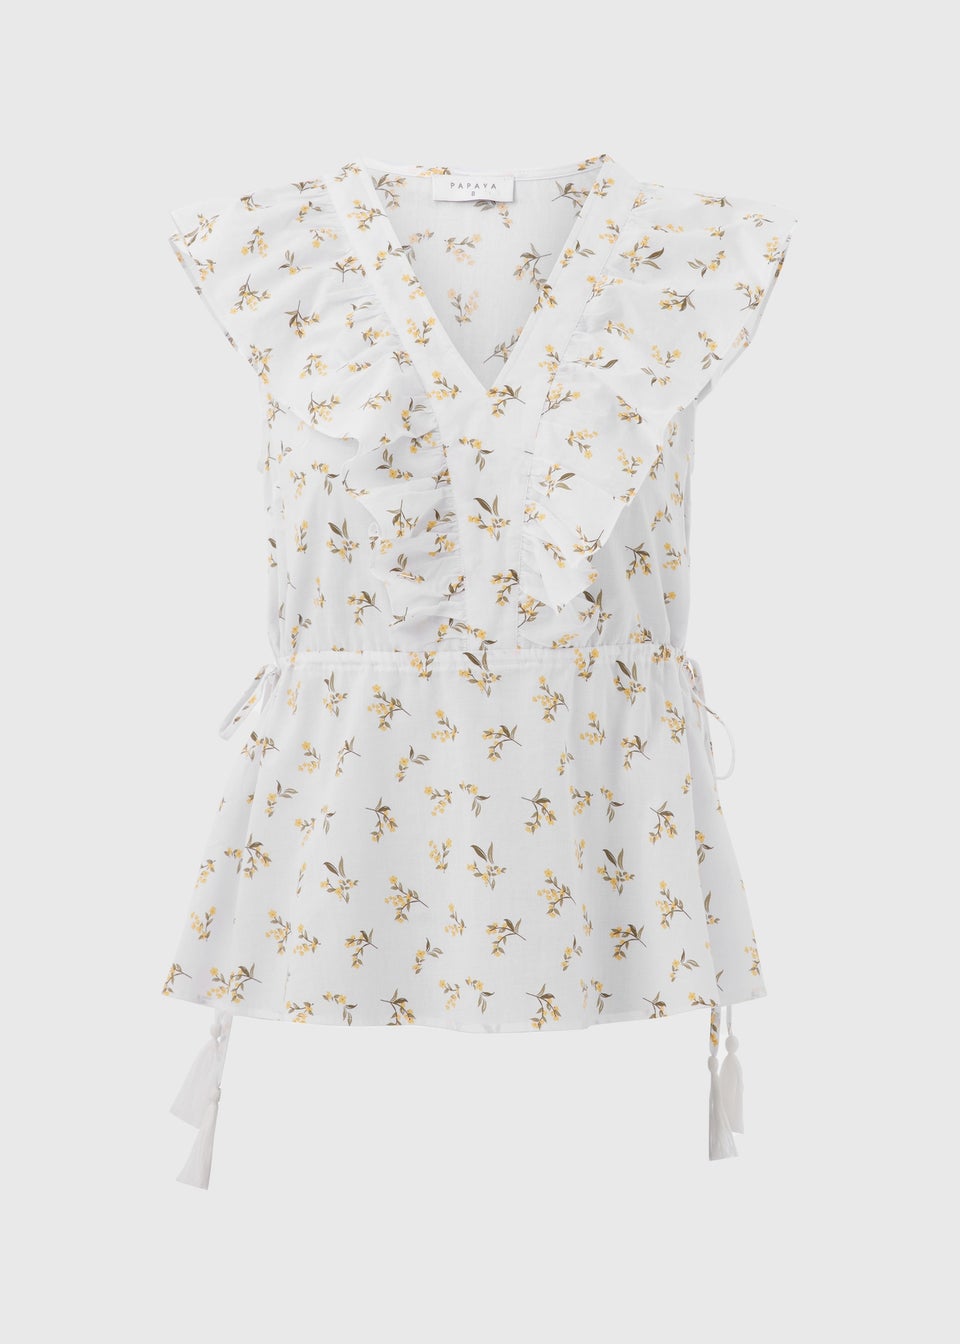 White Floral Print Ruffled Sides Blouse Top